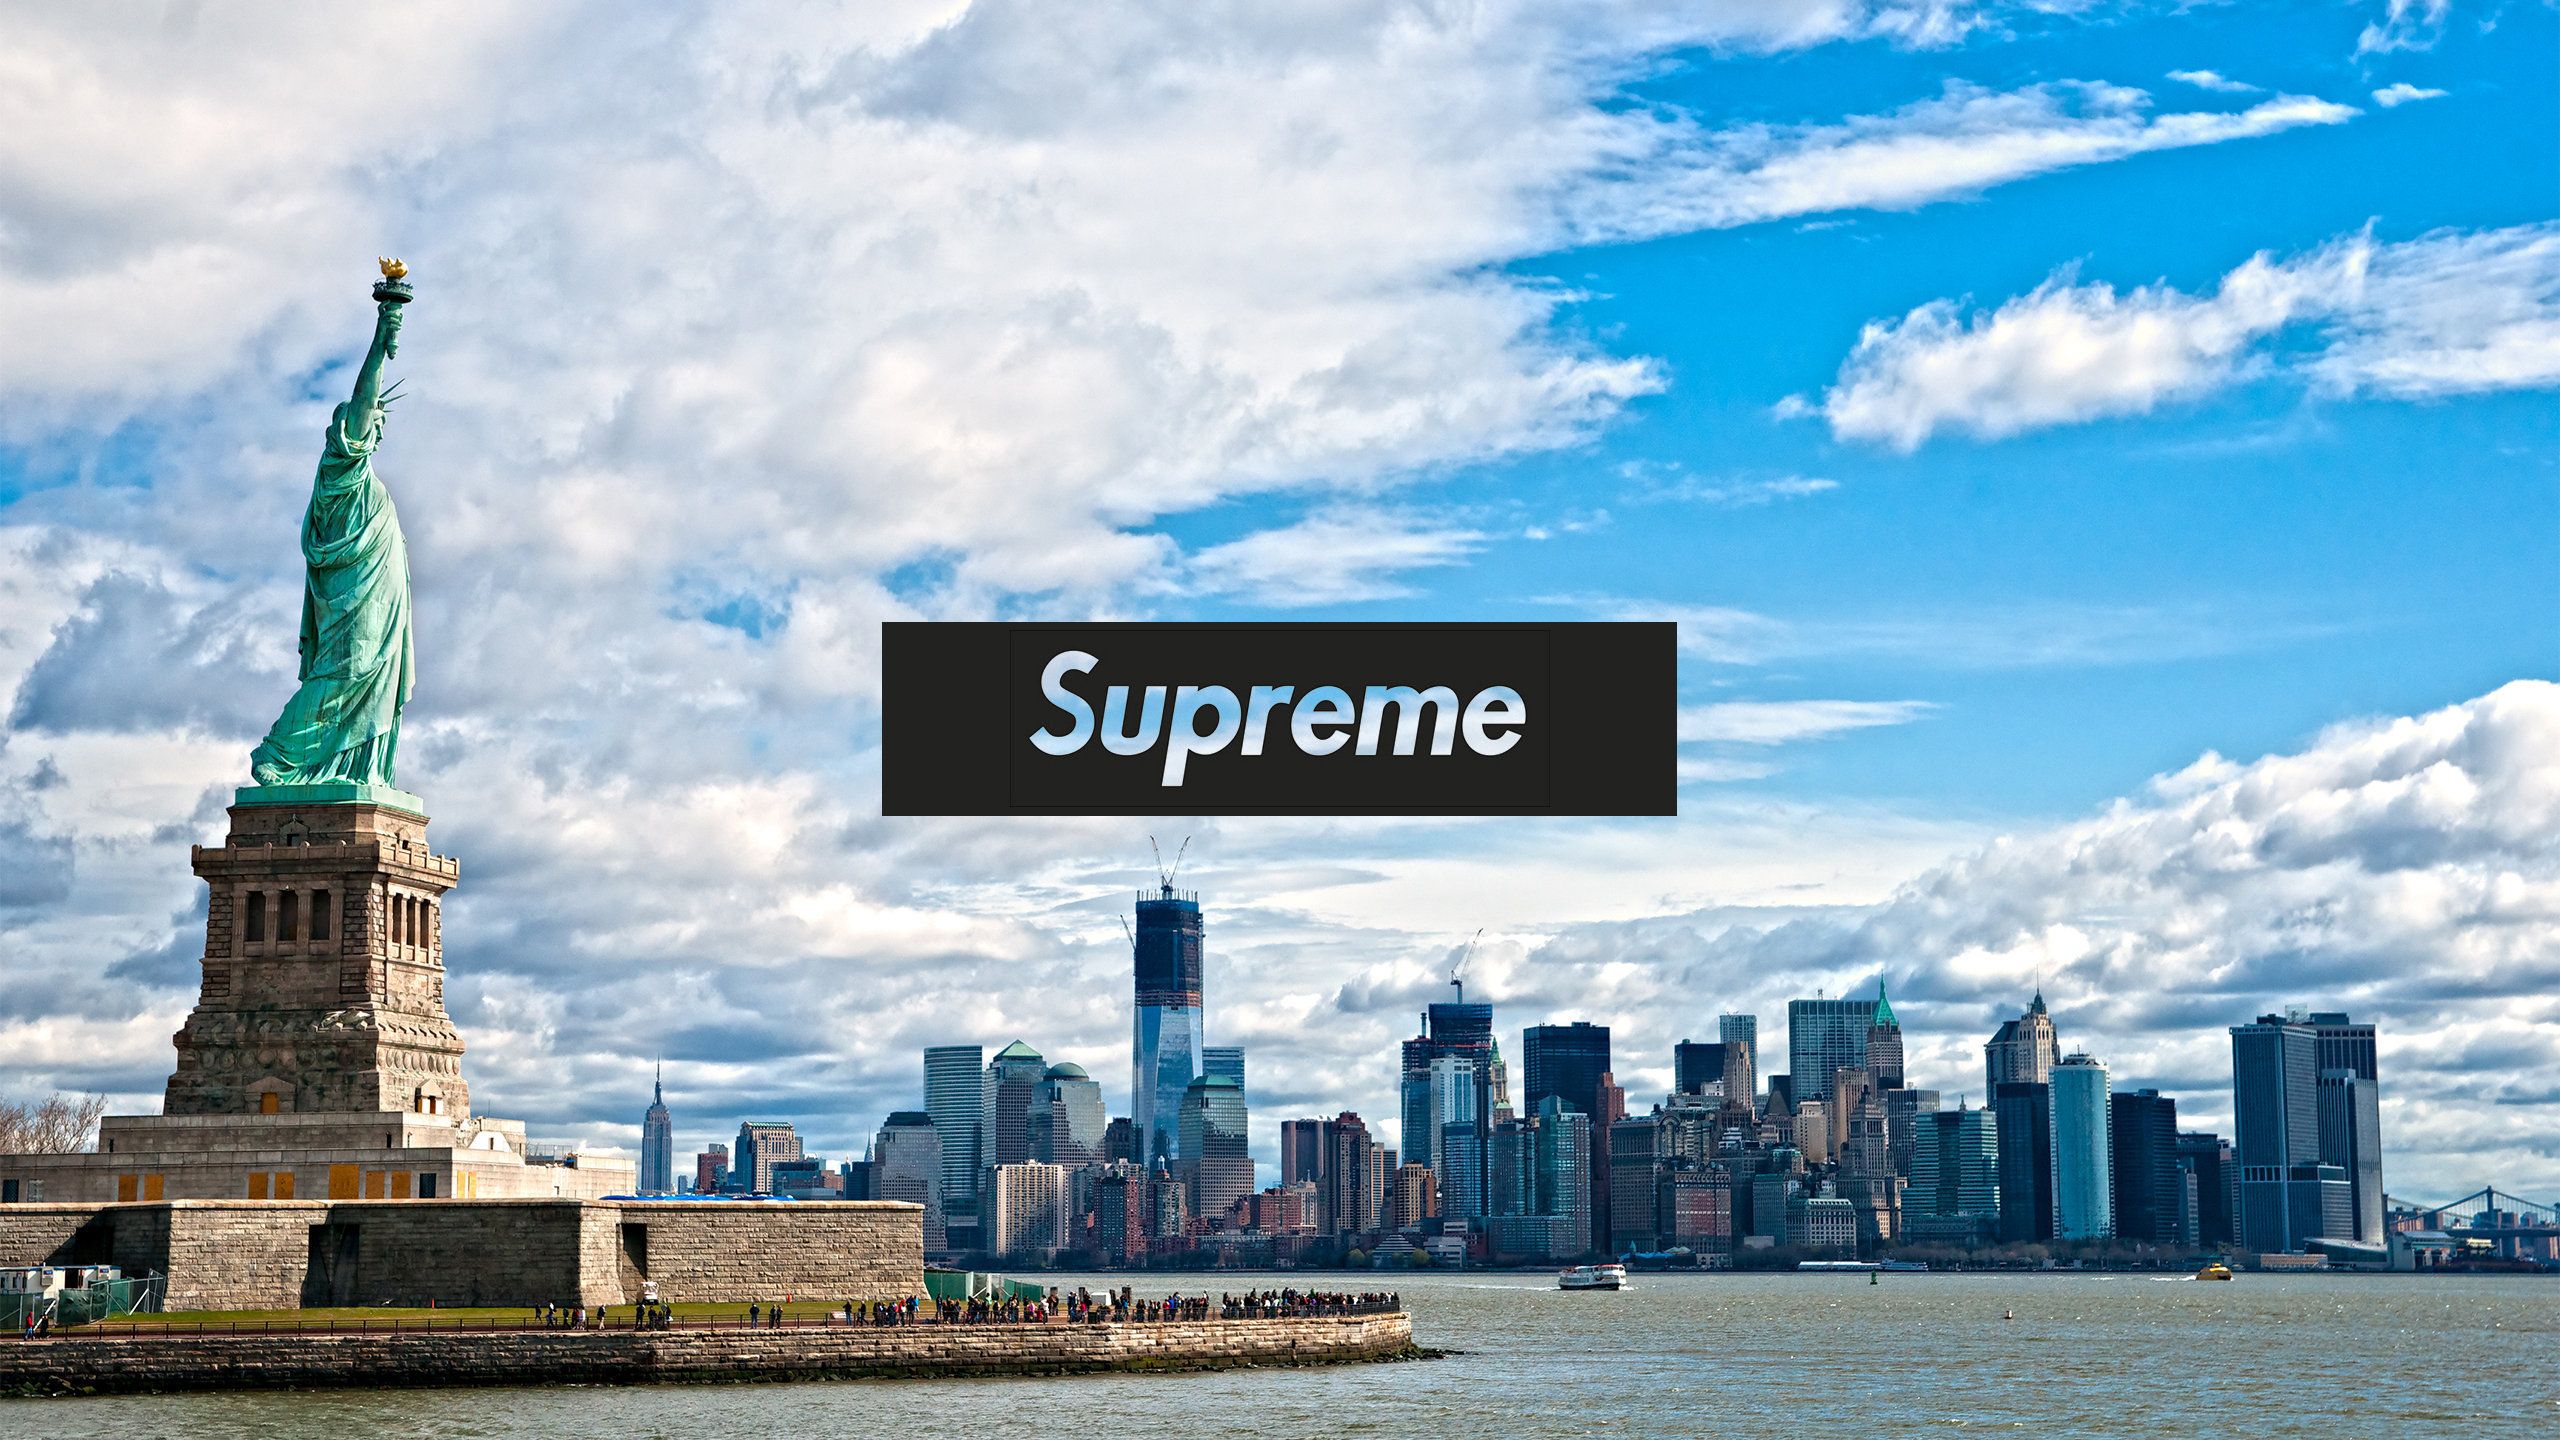 The statue of liberty with the skyline of New York City in the background - Supreme